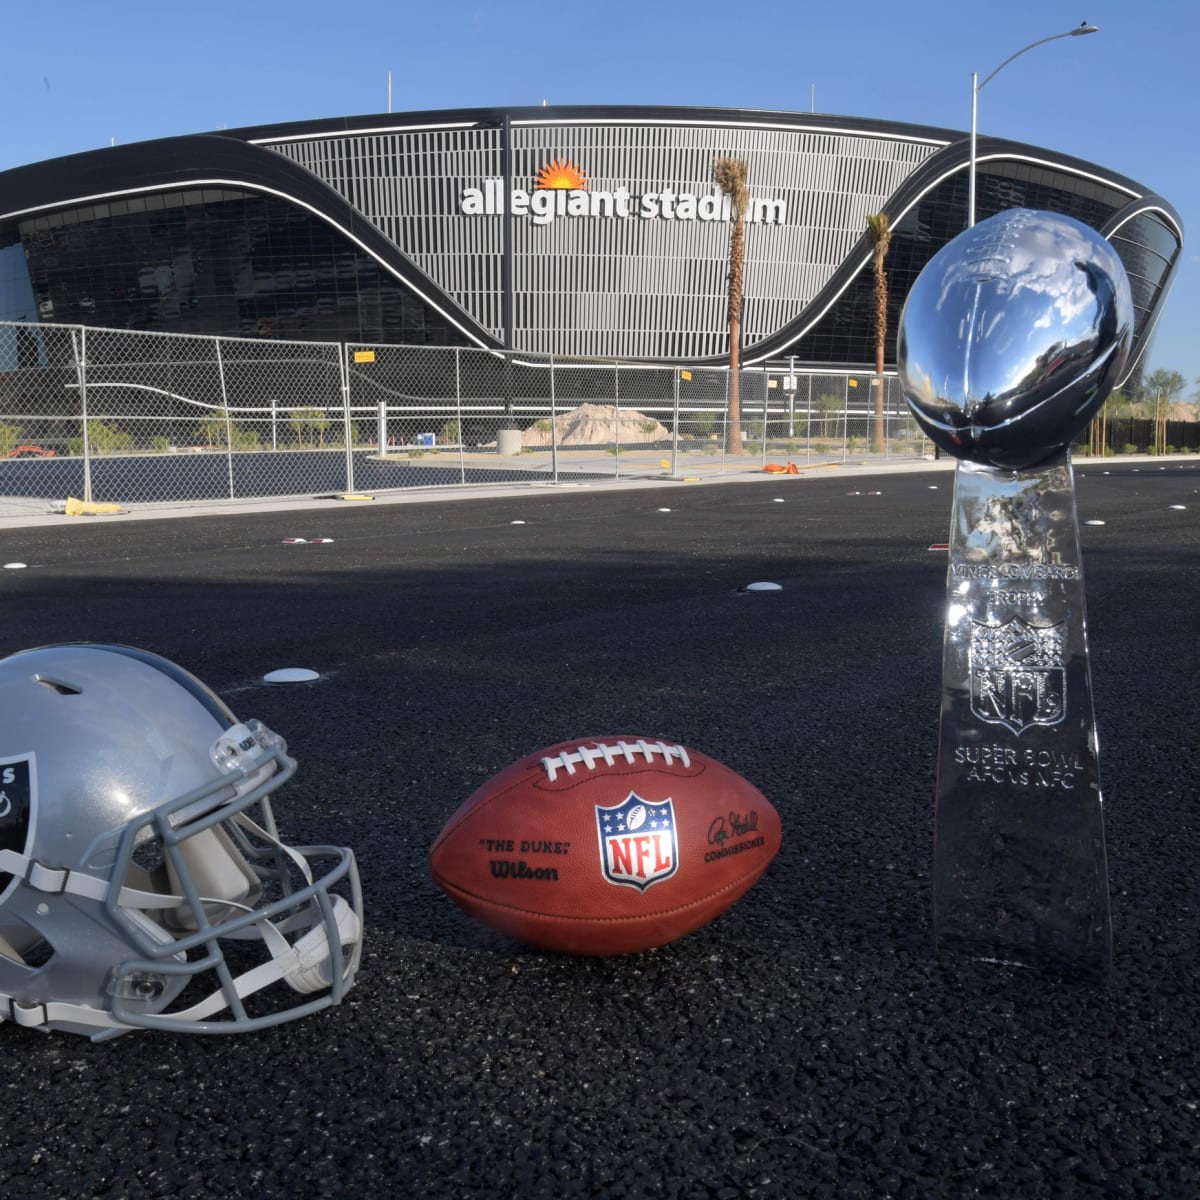 NFL cancels Pro Bowl over COVID-19, awards 2022 game to Las Vegas